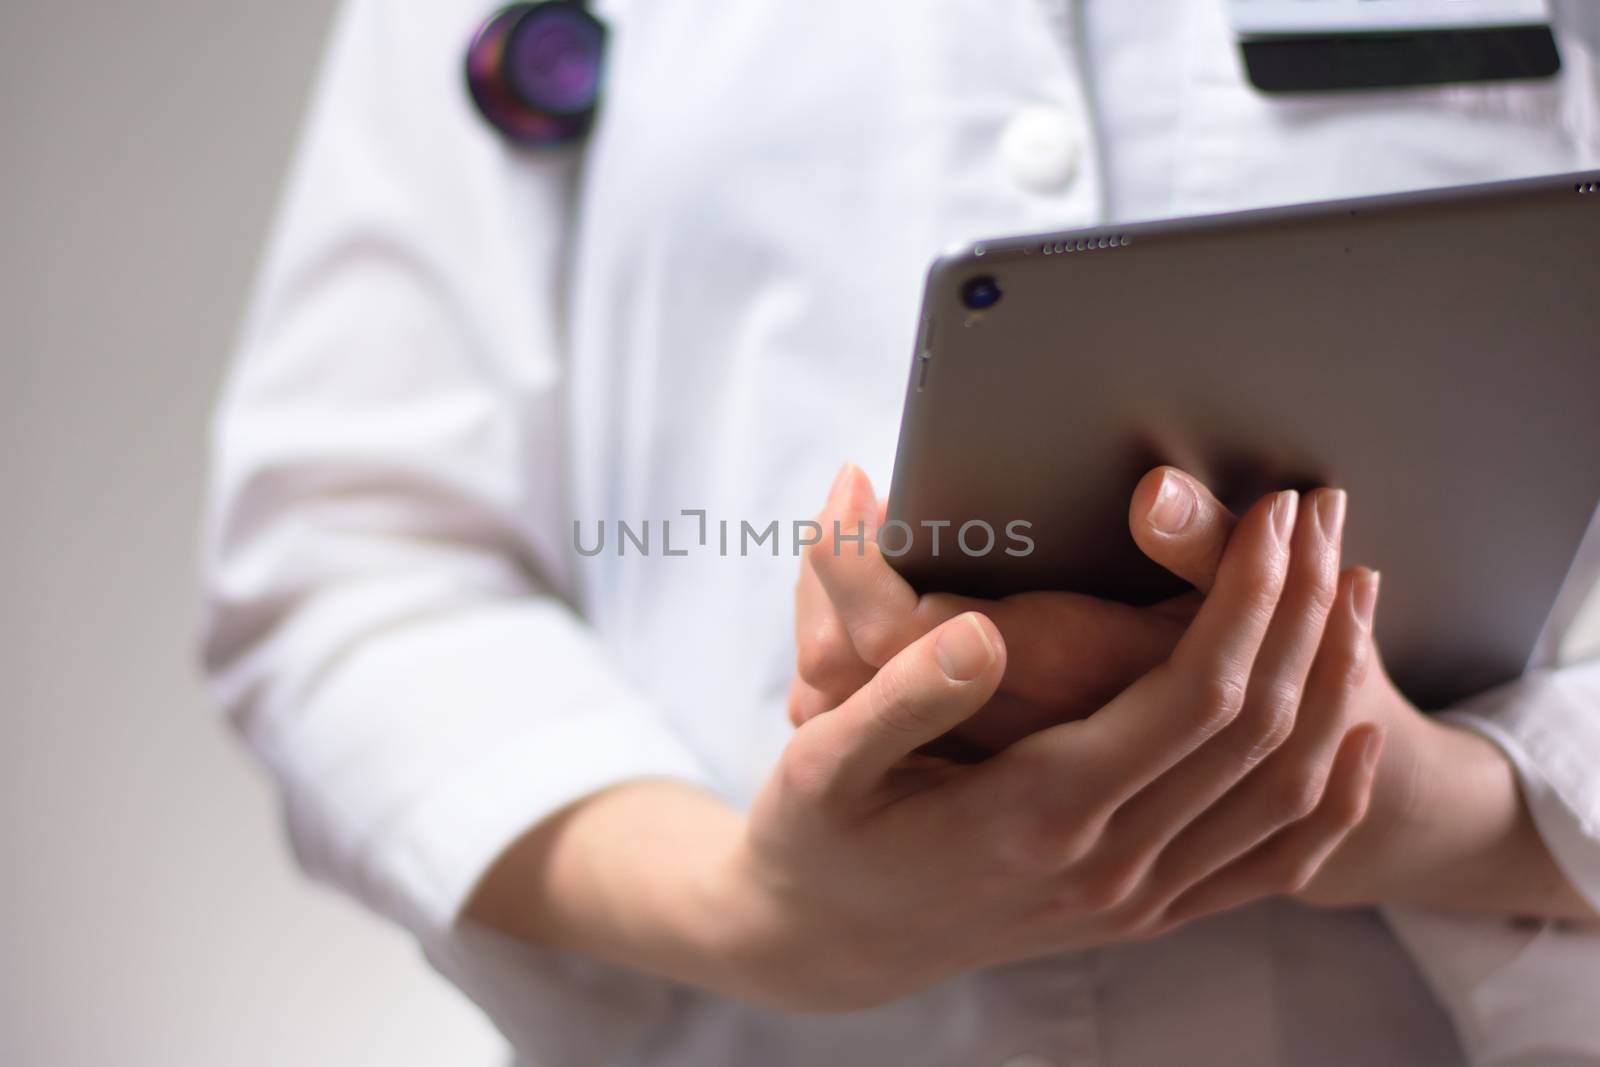 Tablet in the hands of healthcare professional up close. White coat, stethoscope, and badge visible in background. Hands of nurse practitioner or PA using technology in medicine for patients